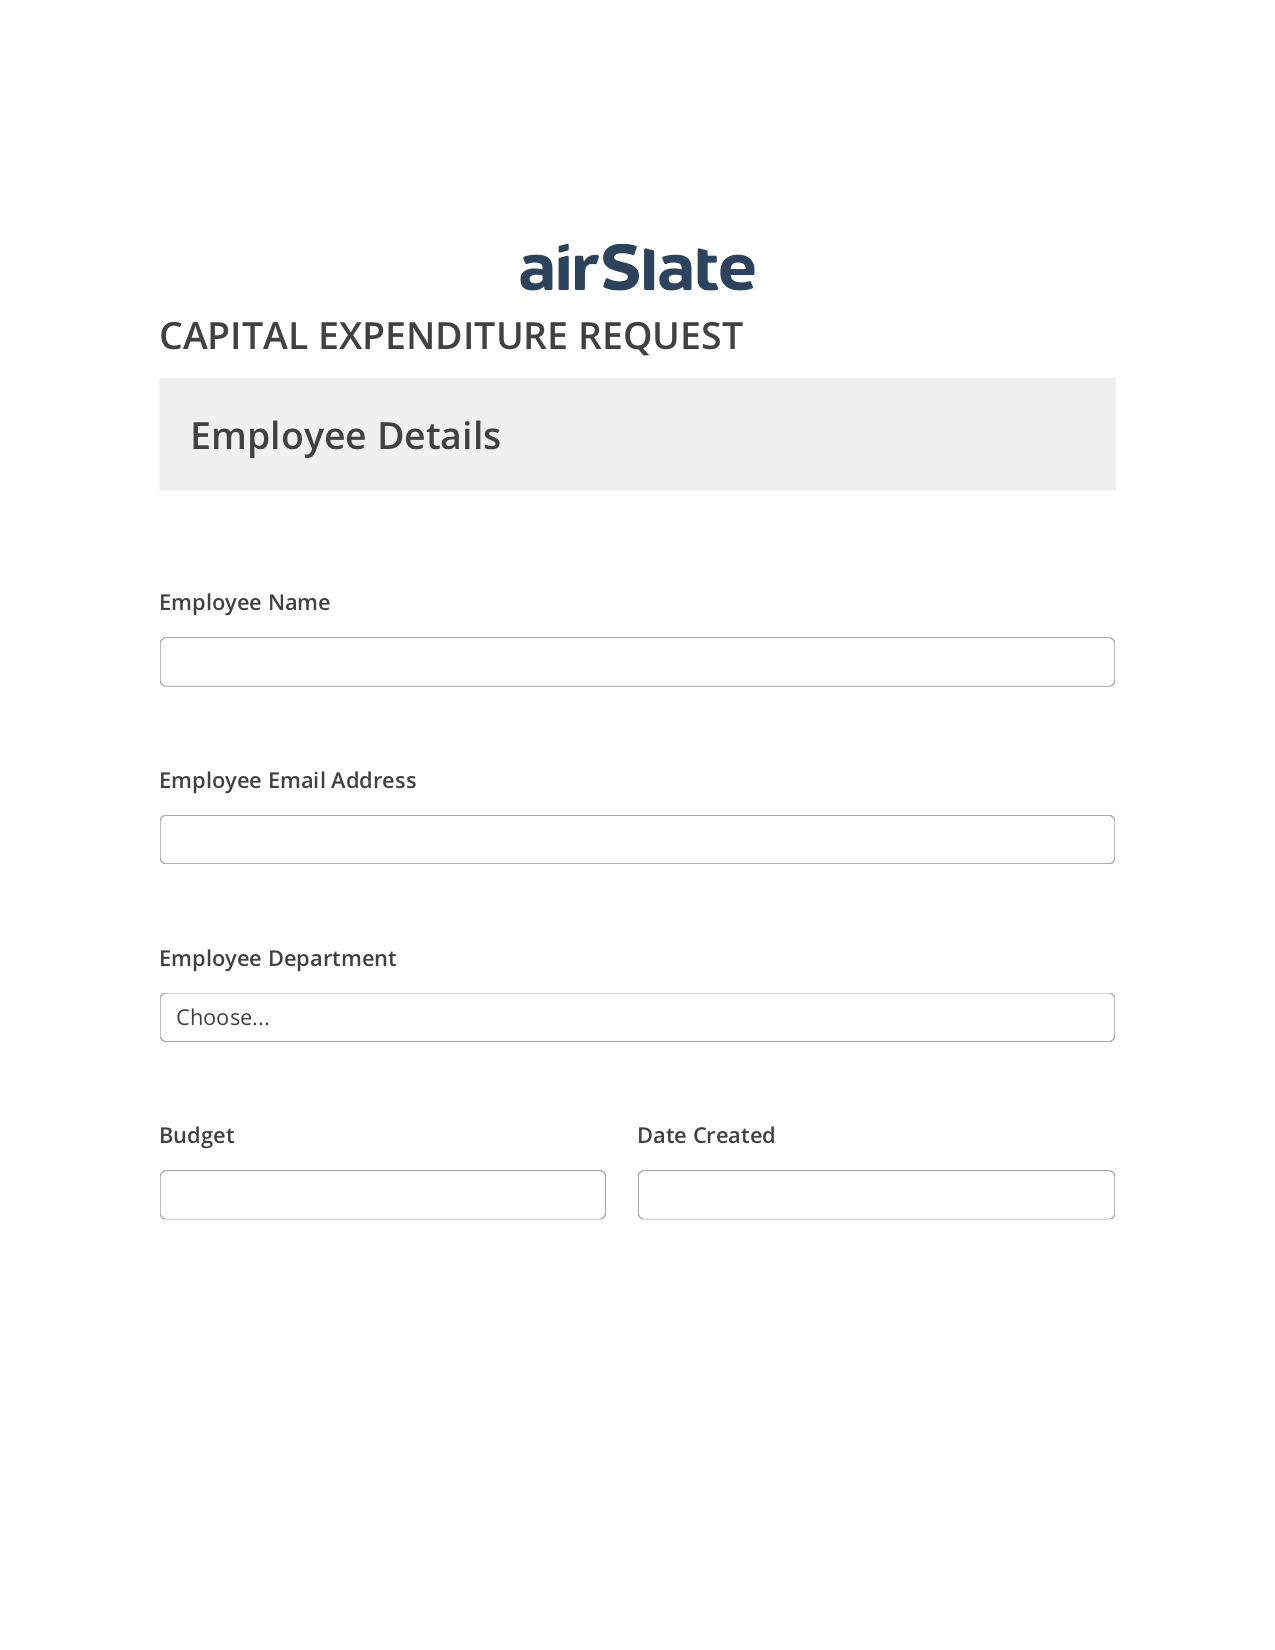 Capital Expenditure Request Approval Workflow Pre-fill from Google Sheet Dropdown Options Bot, Create MS Dynamics Record Bot, Text Message Notification Postfinish Bot